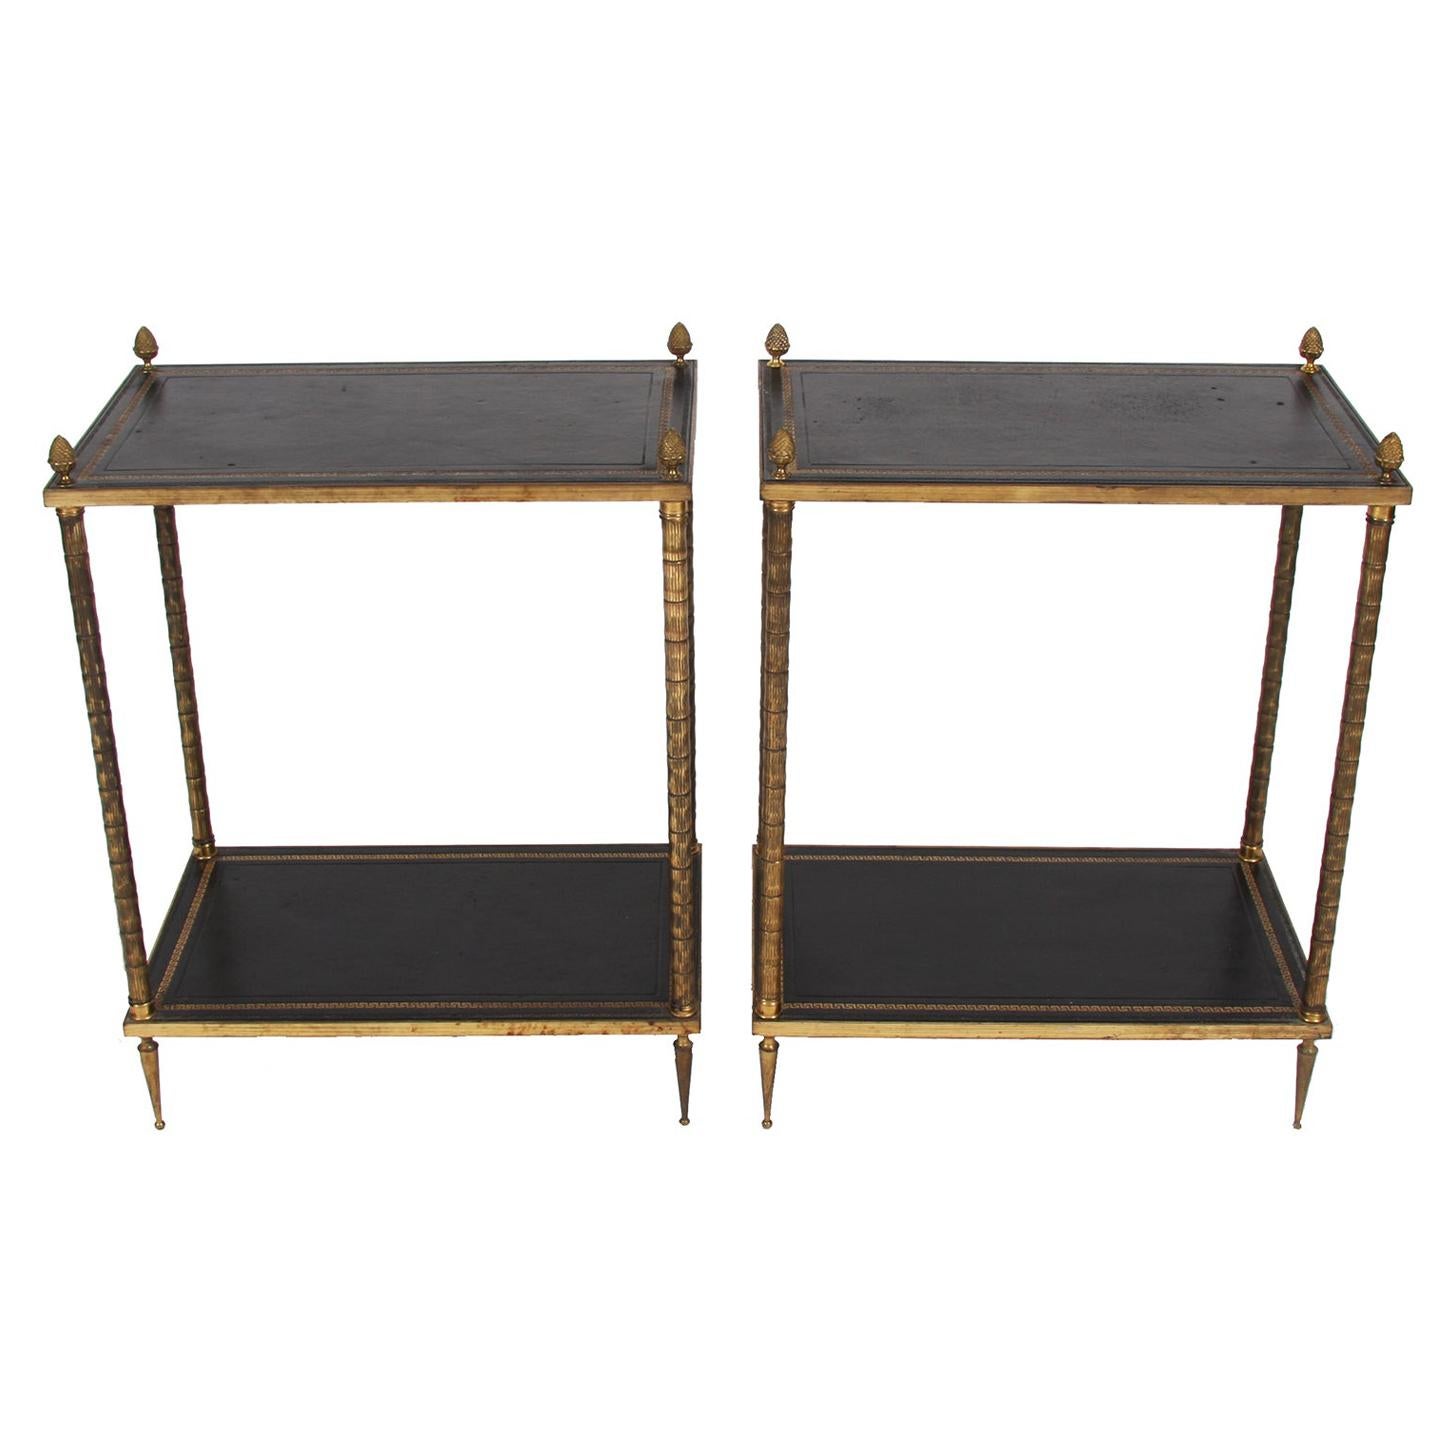 Pair of Two-Tier Leather Top and Brass Side Tables